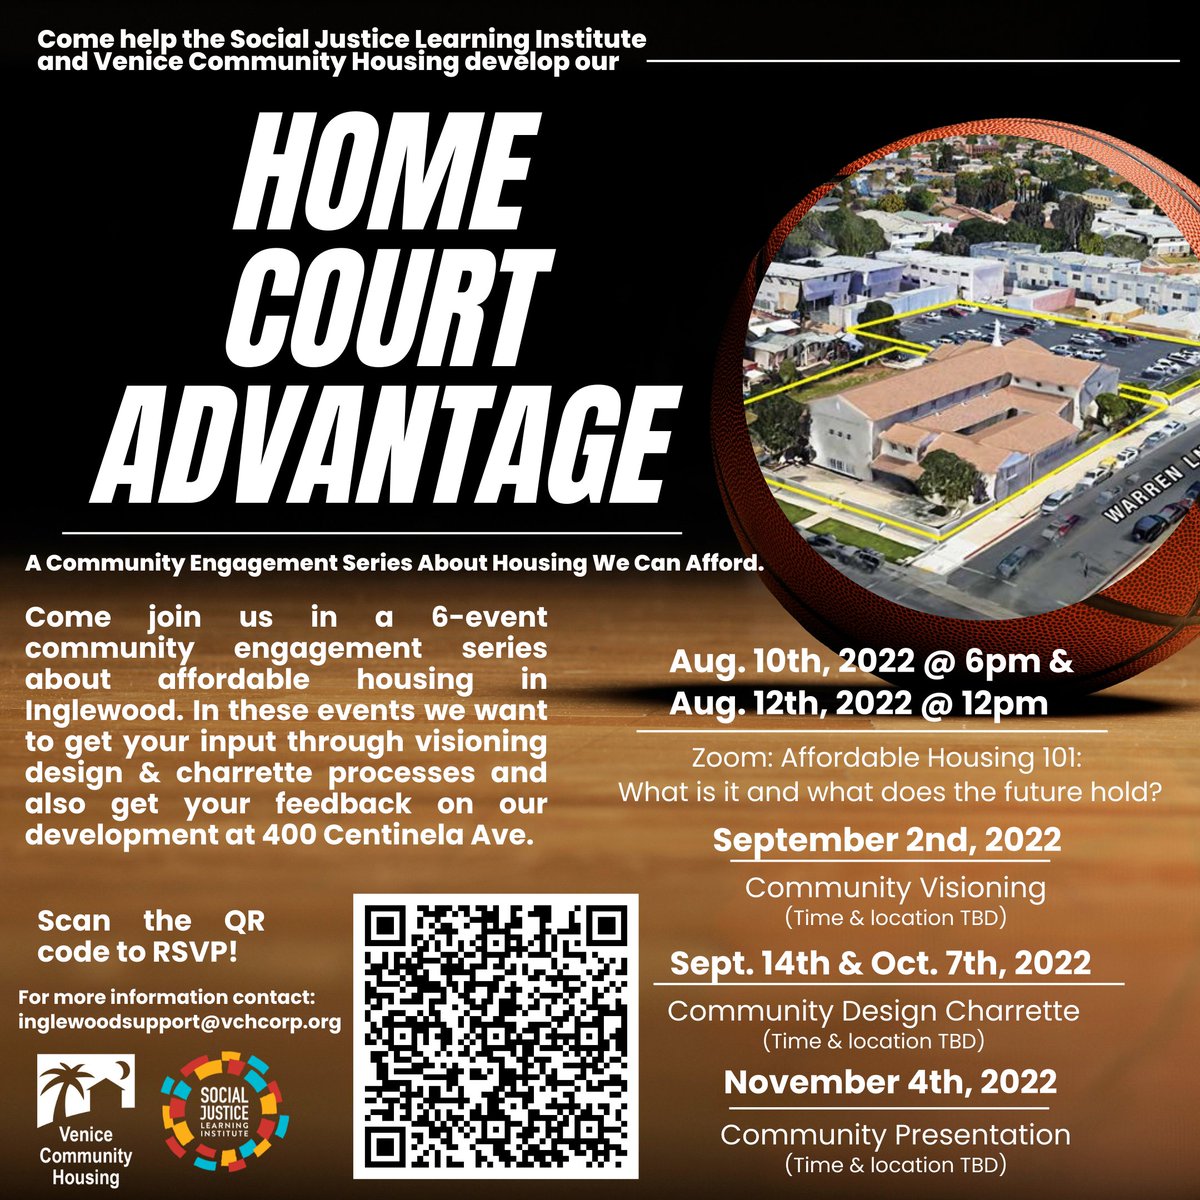 Have you registered for our second series on affordable housing in #Inglewood?It's not too late, register now at https://t.co/Z2sfcV4a7z, then join us on #Zoom TODAY at 12p (PST)! https://t.co/1RoOWqc19i